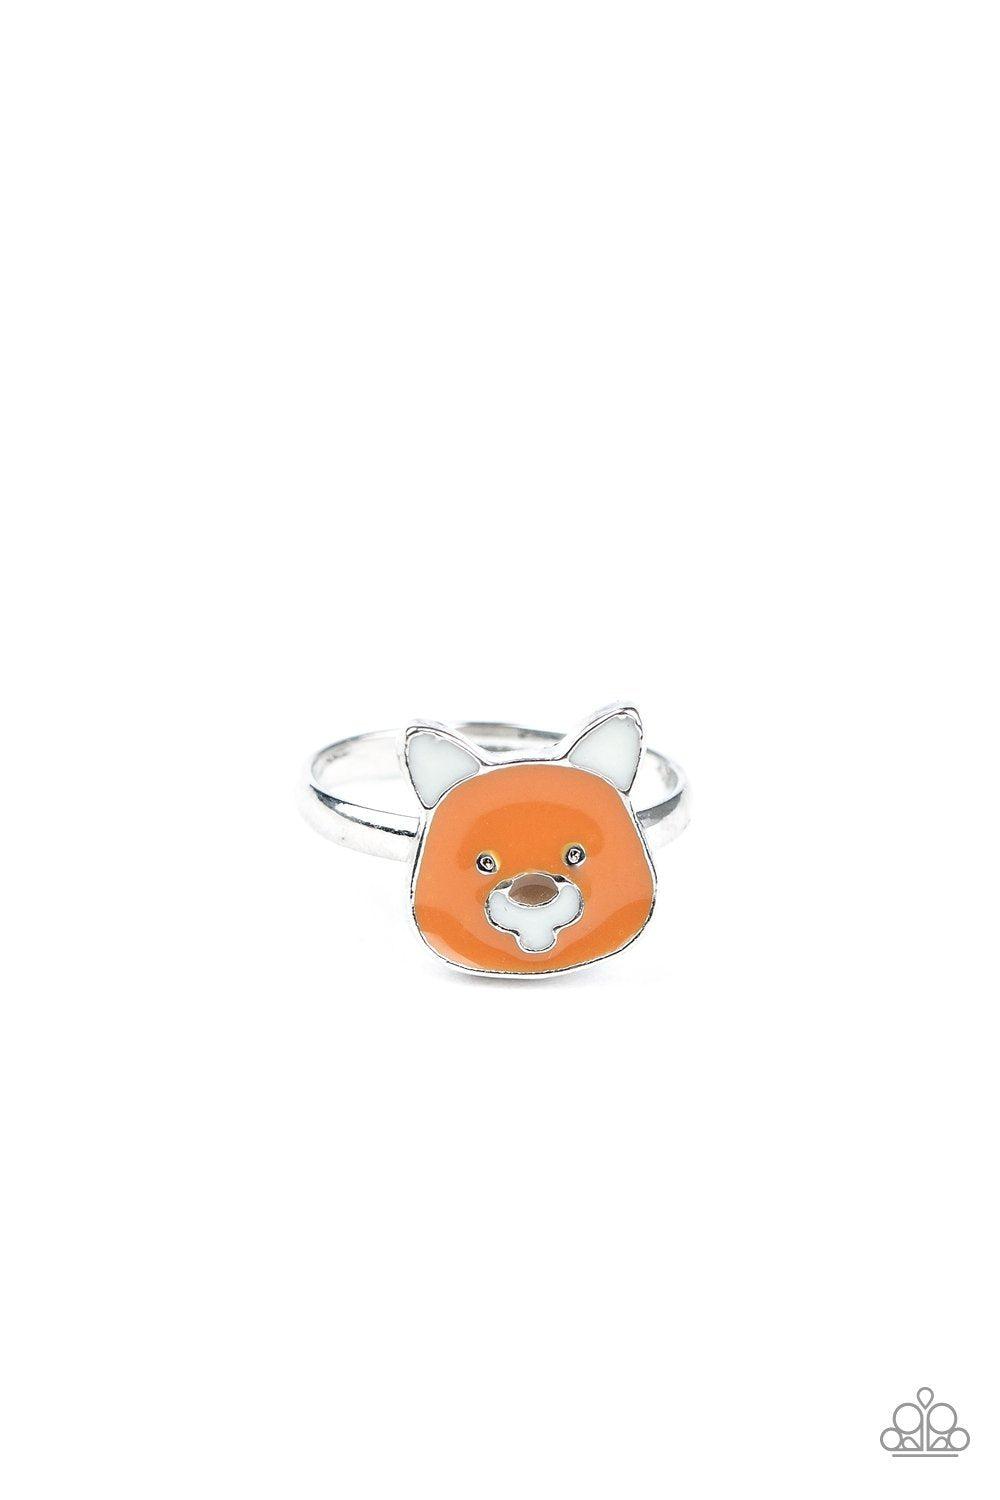 Starlet Shimmer Children's Forest Friends Animal Rings - Paparazzi Accessories (set of 5)-CarasShop.com - $5 Jewelry by Cara Jewels